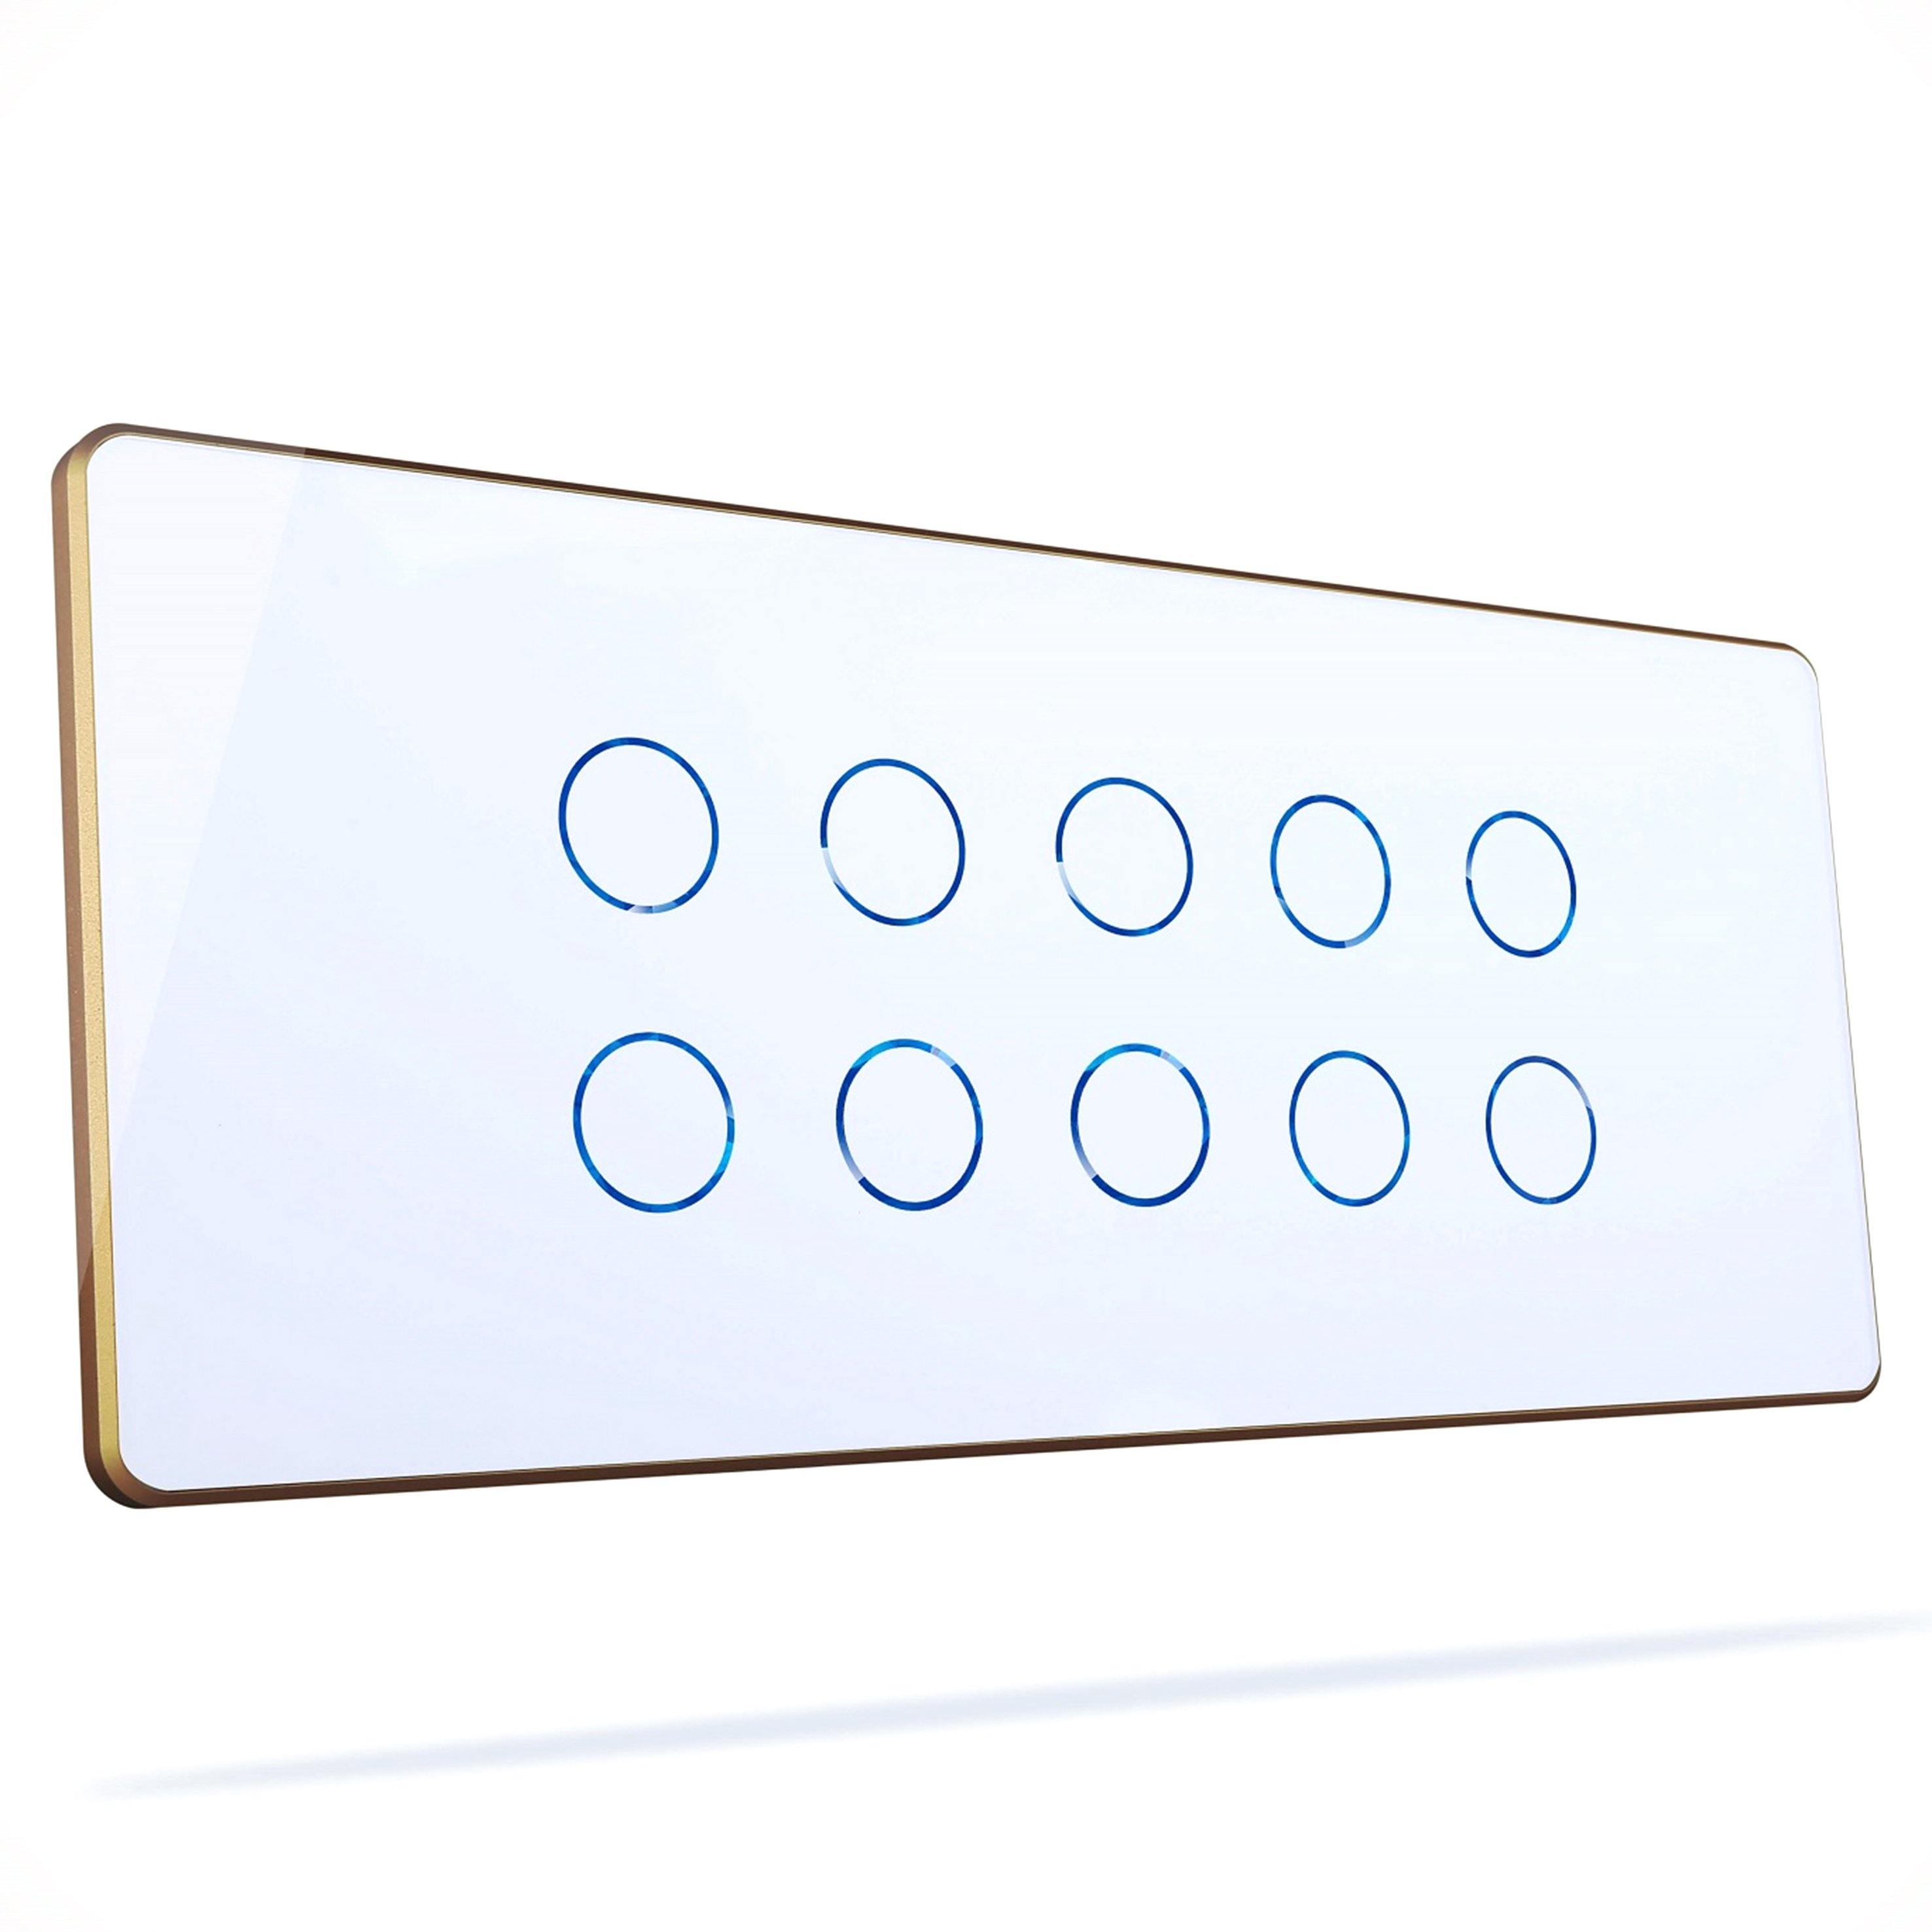 HOGAR SMART TEN TOUCH SWITCH PANLES WITH BUILT-IN AUTOMATION - Ankur Lighting